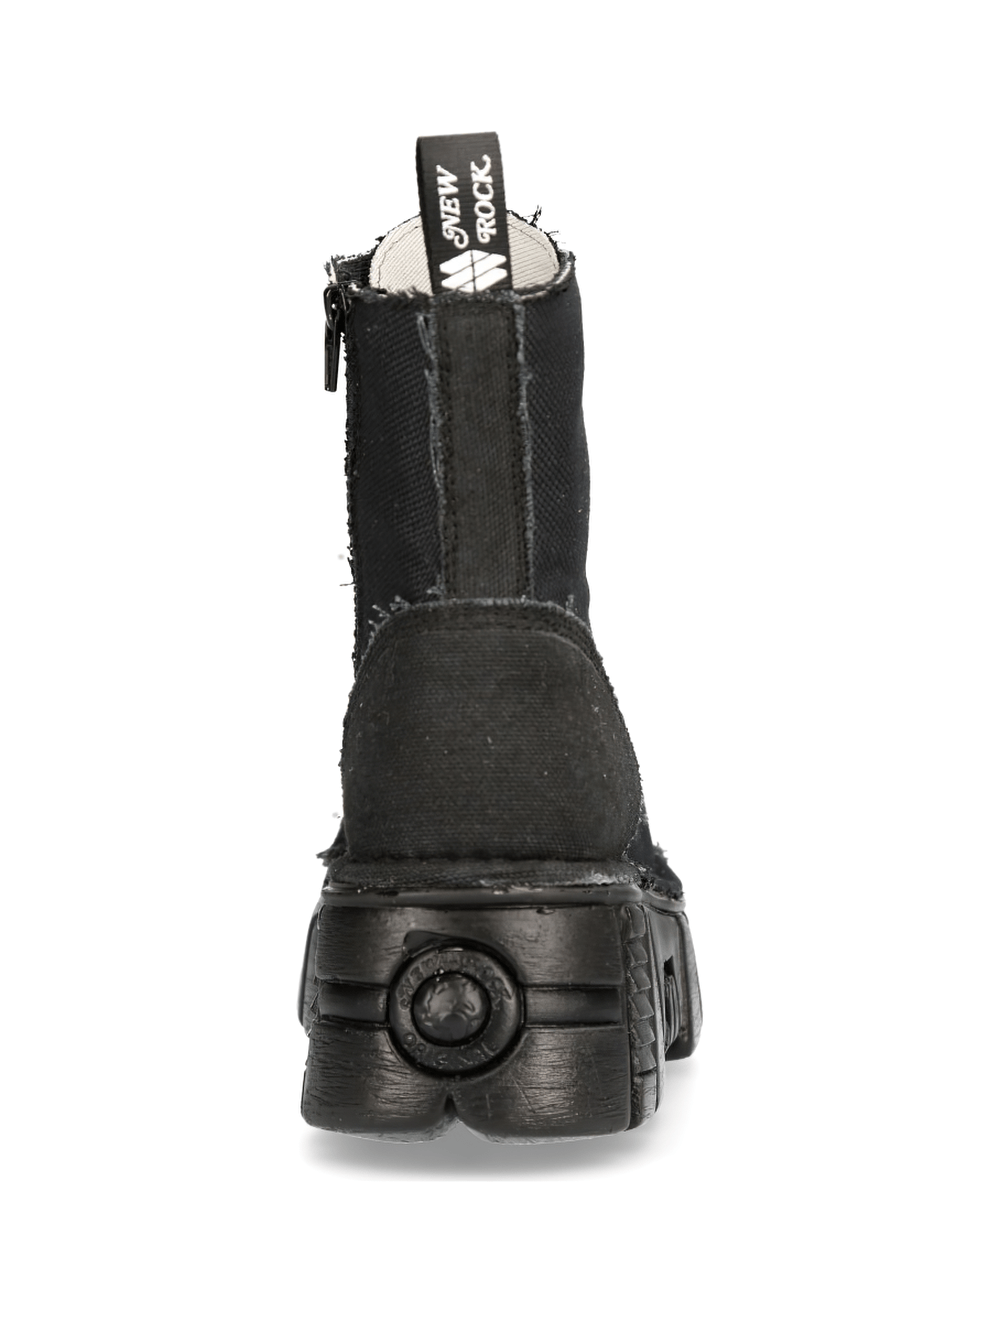 NEW ROCK Black Tower Military-Style Robust Boots